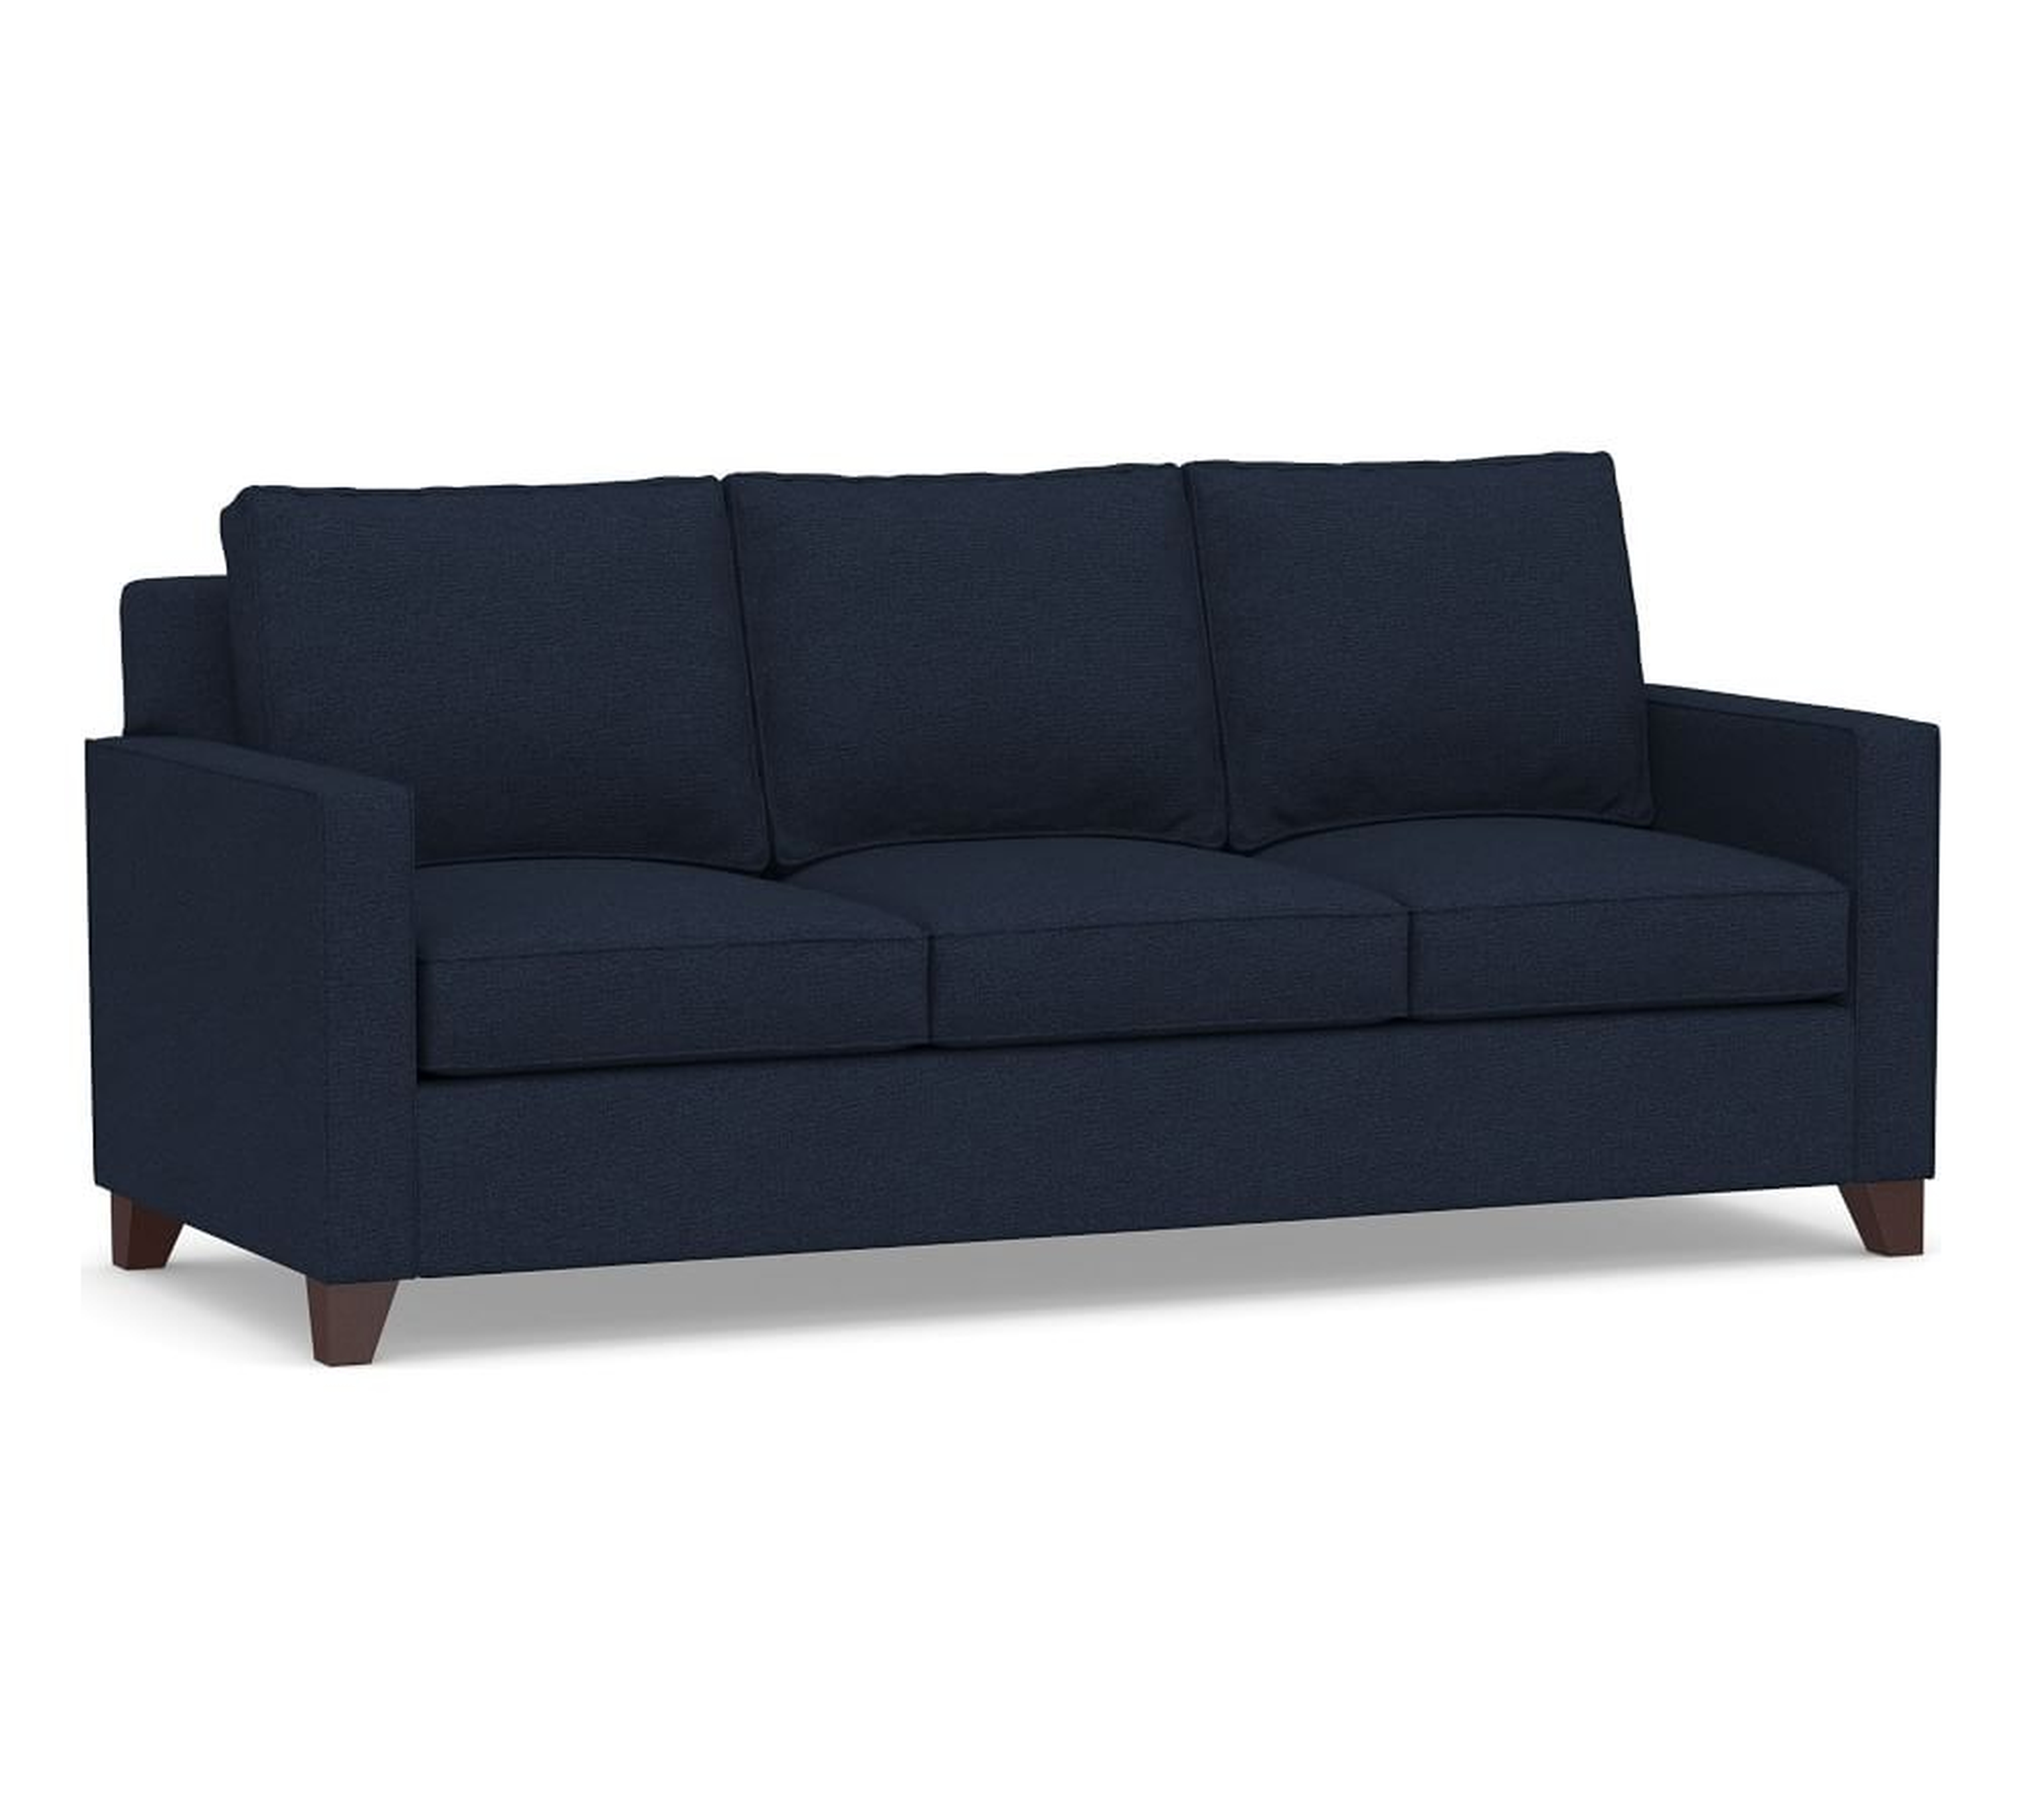 Cameron Square Arm Upholstered Sofa 86" 3-Seater, Polyester Wrapped Cushions, Performance Heathered Basketweave Navy - Pottery Barn